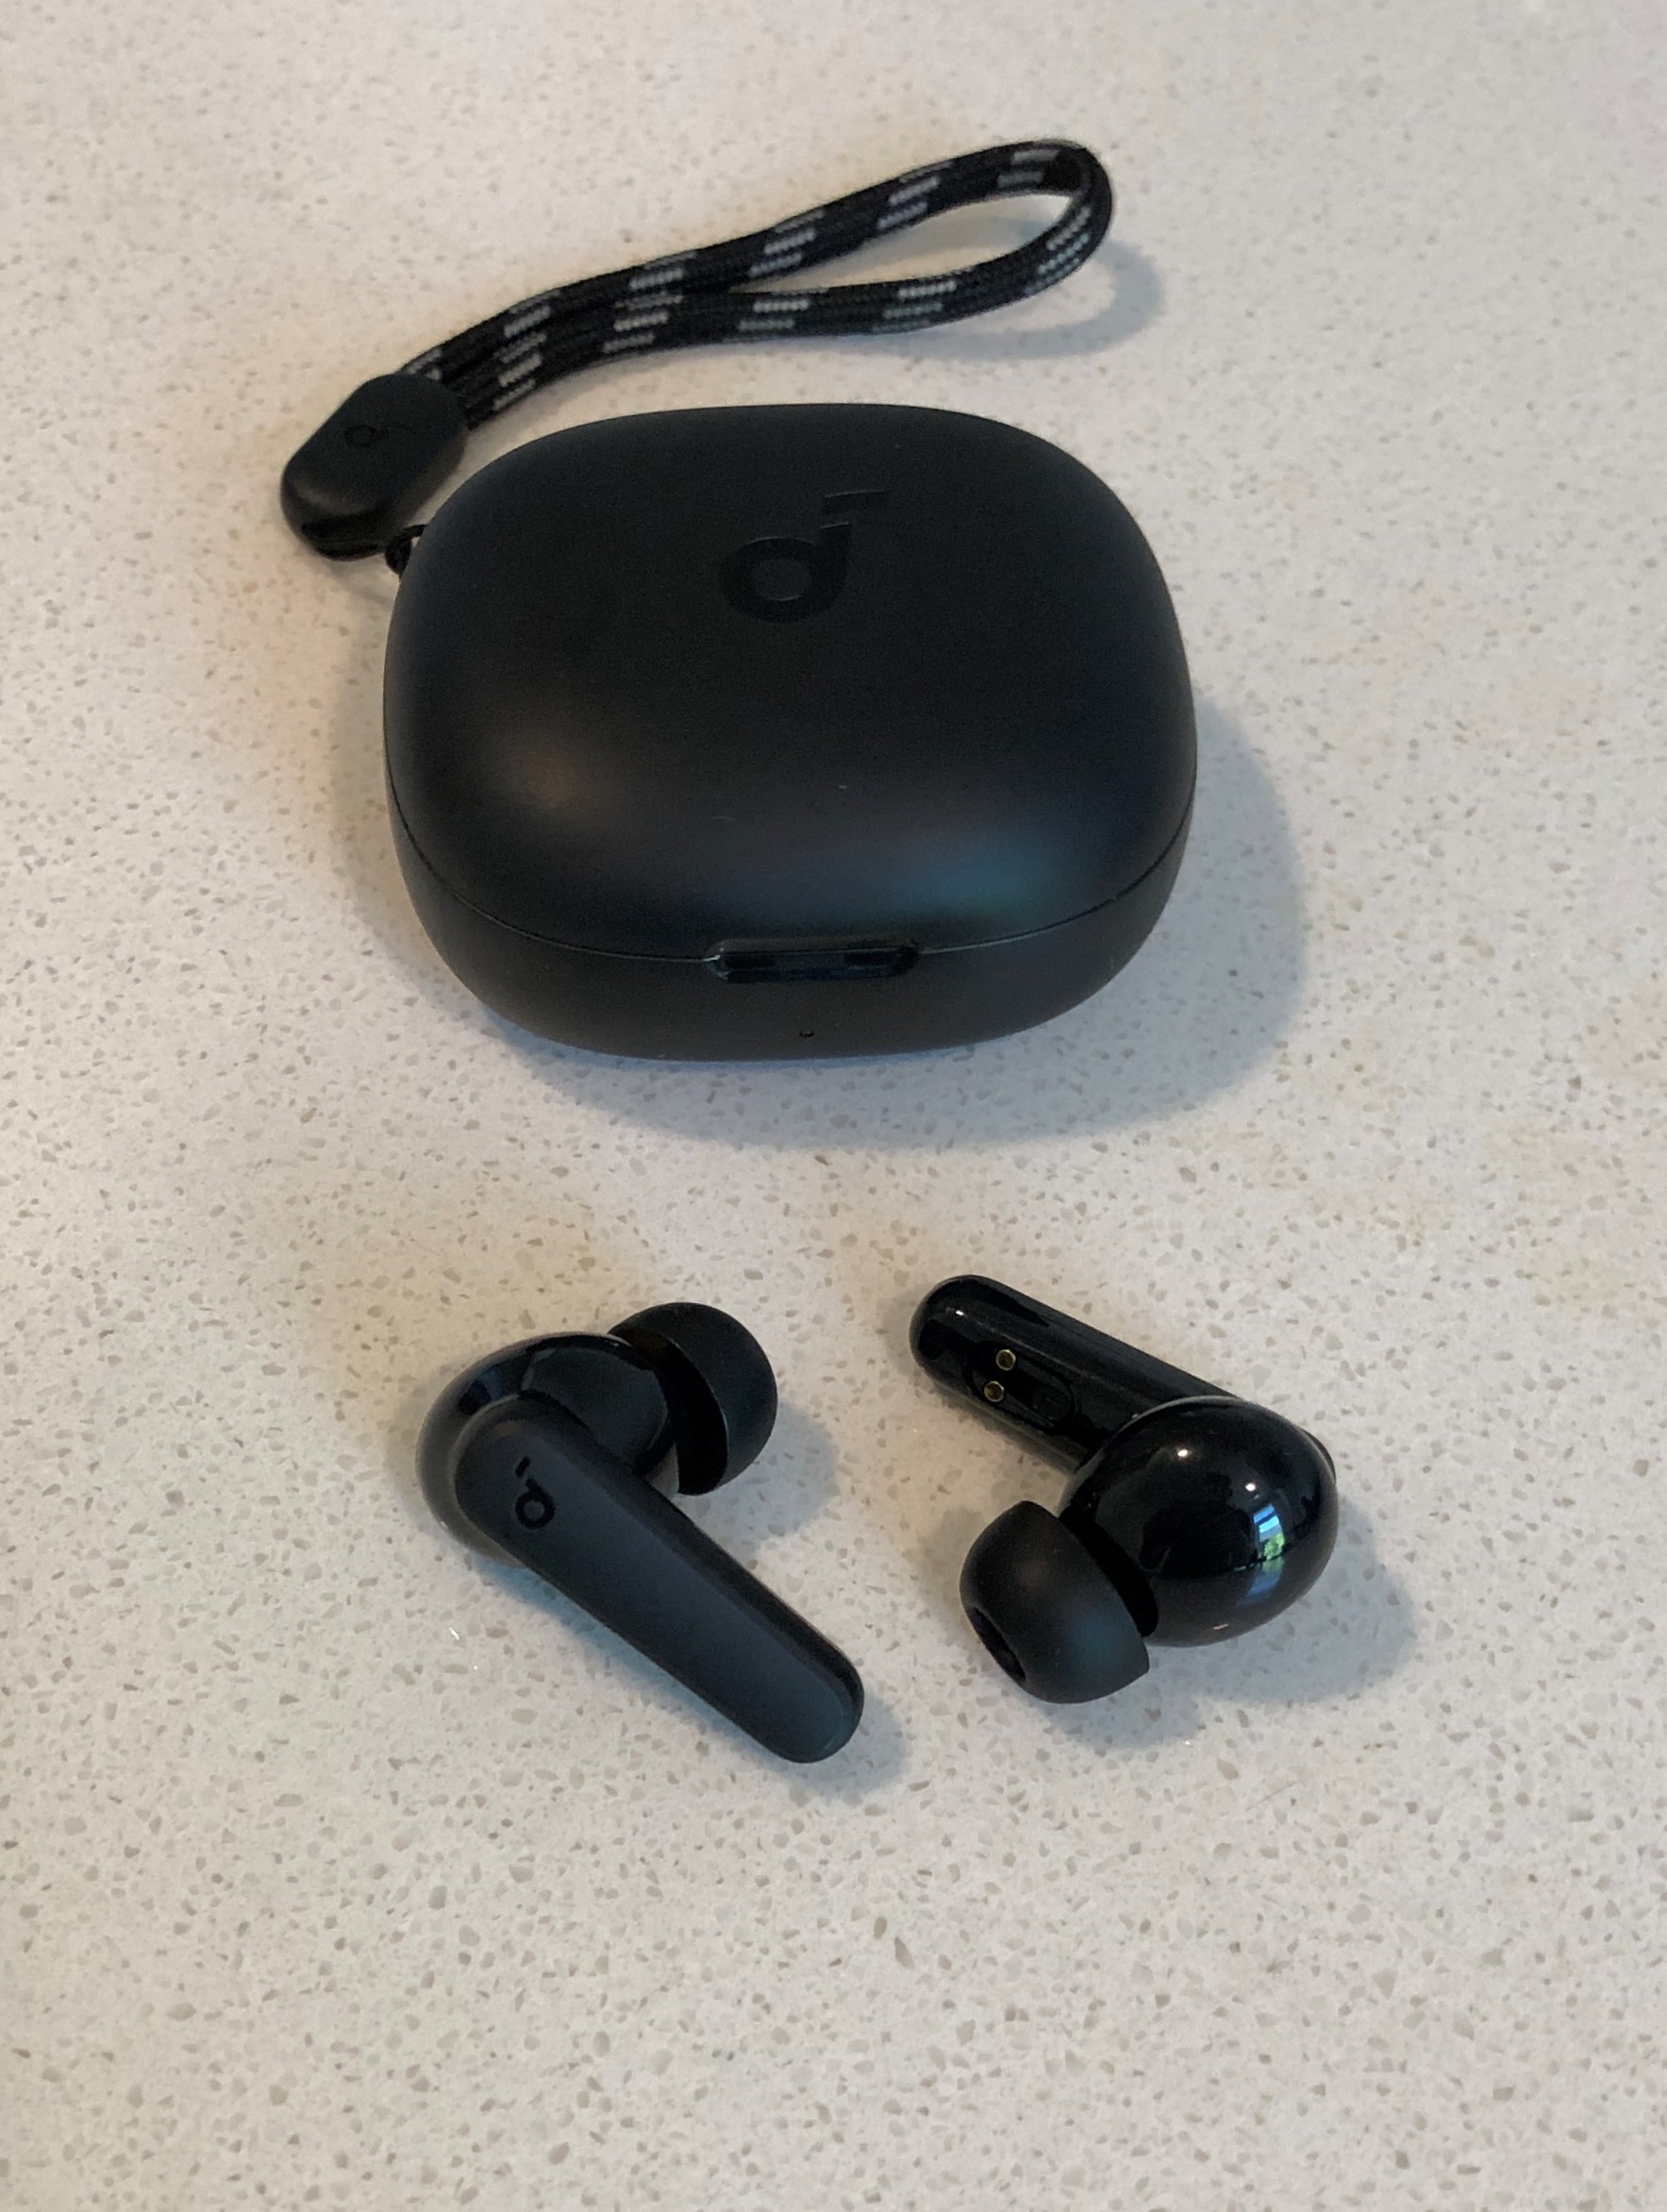 Soundcore P20i case and wireless earbuds main pic